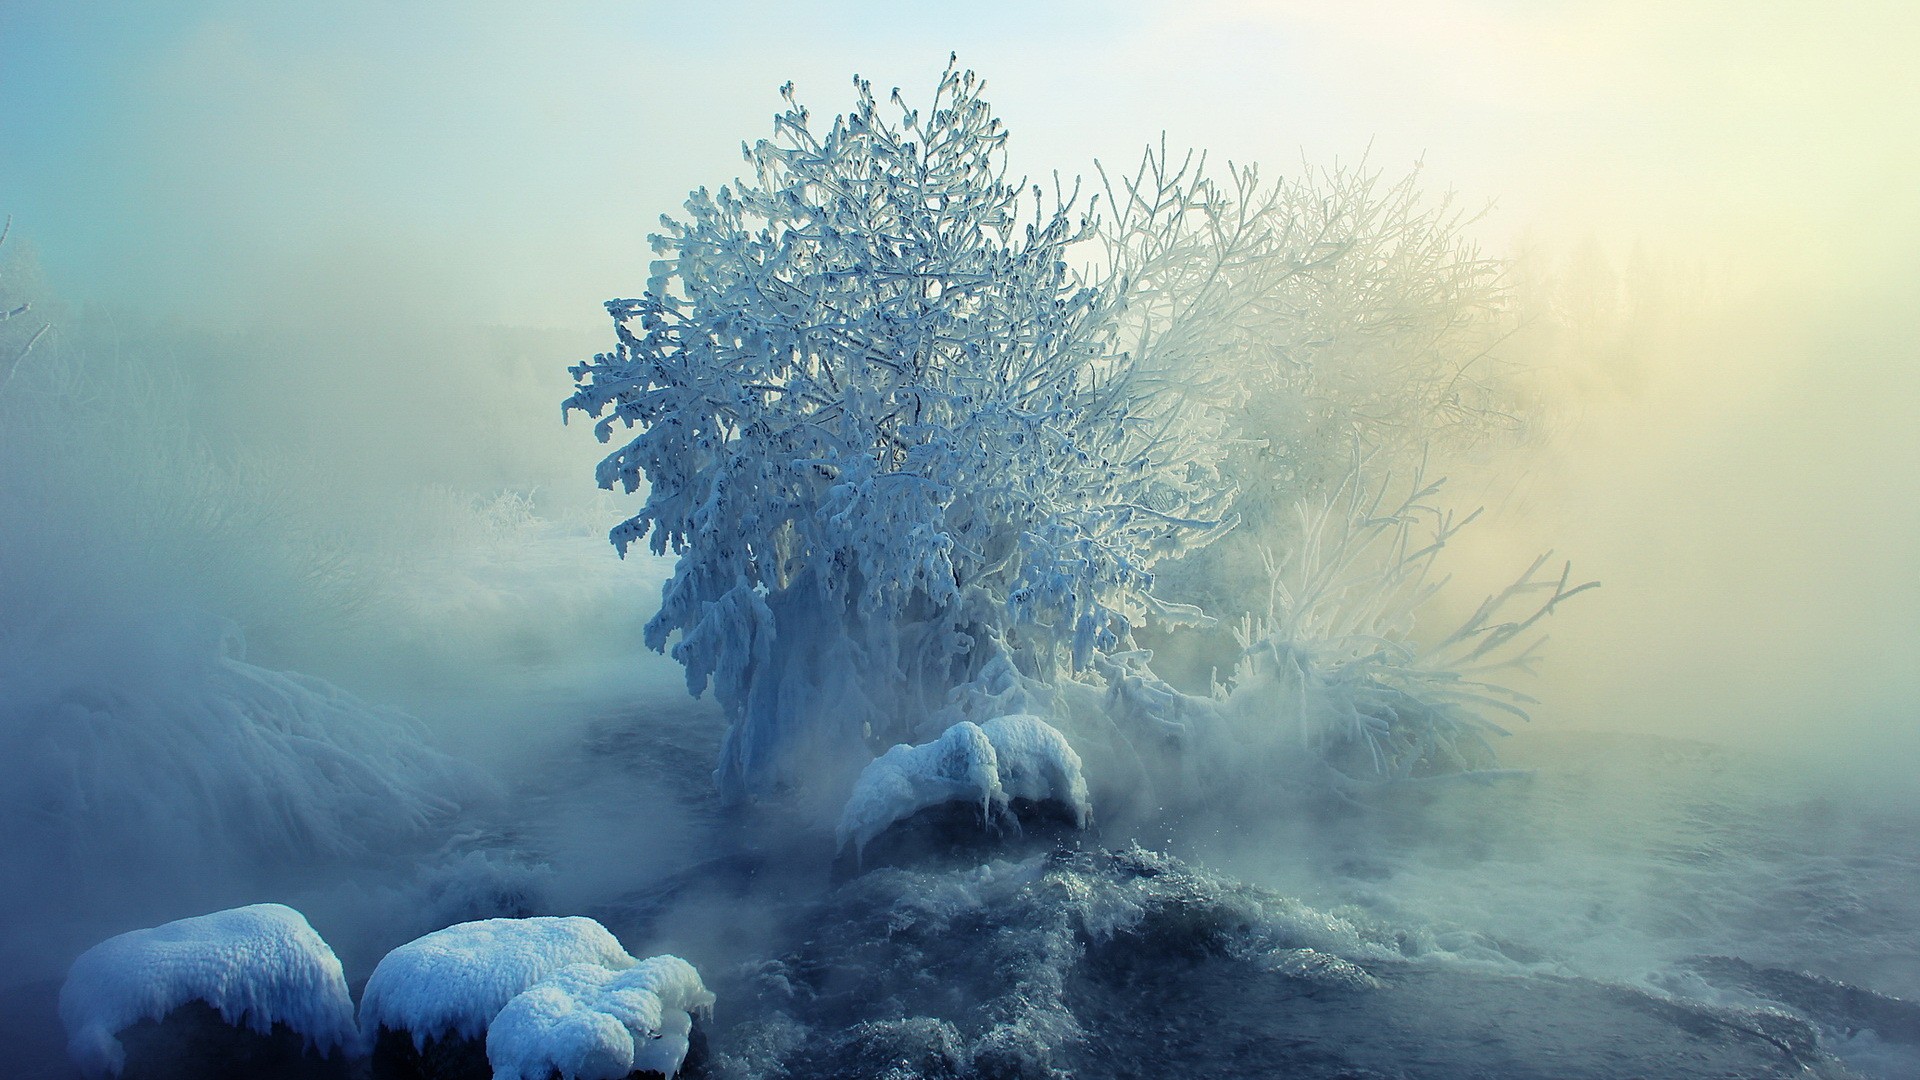 General 1920x1080 winter landscape ice snow nature river mist frost blue light blue cold outdoors